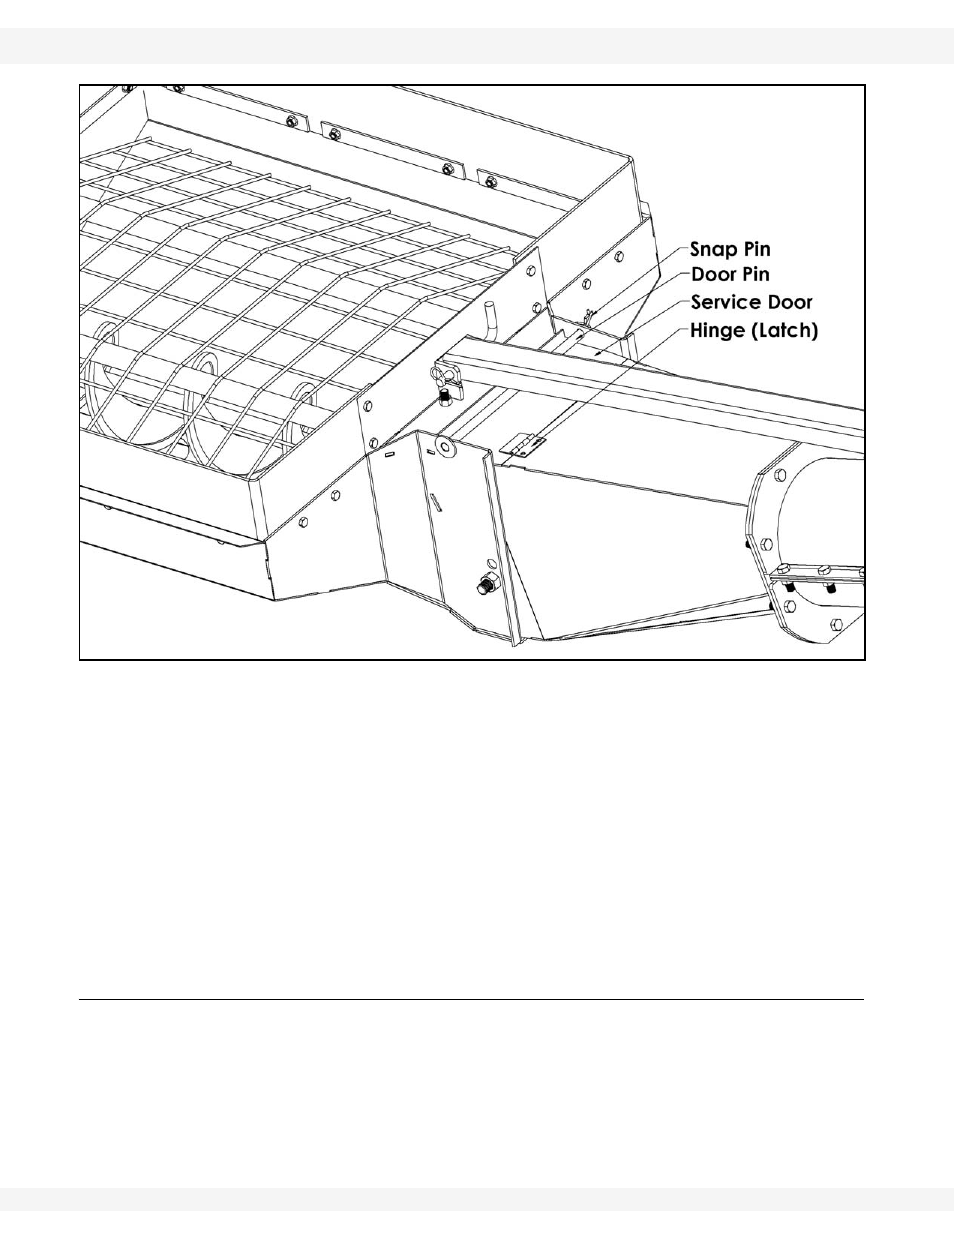 Maintenance procedures | Wheatheart GHR Augers Intake Hopper User Manual | Page 16 / 18